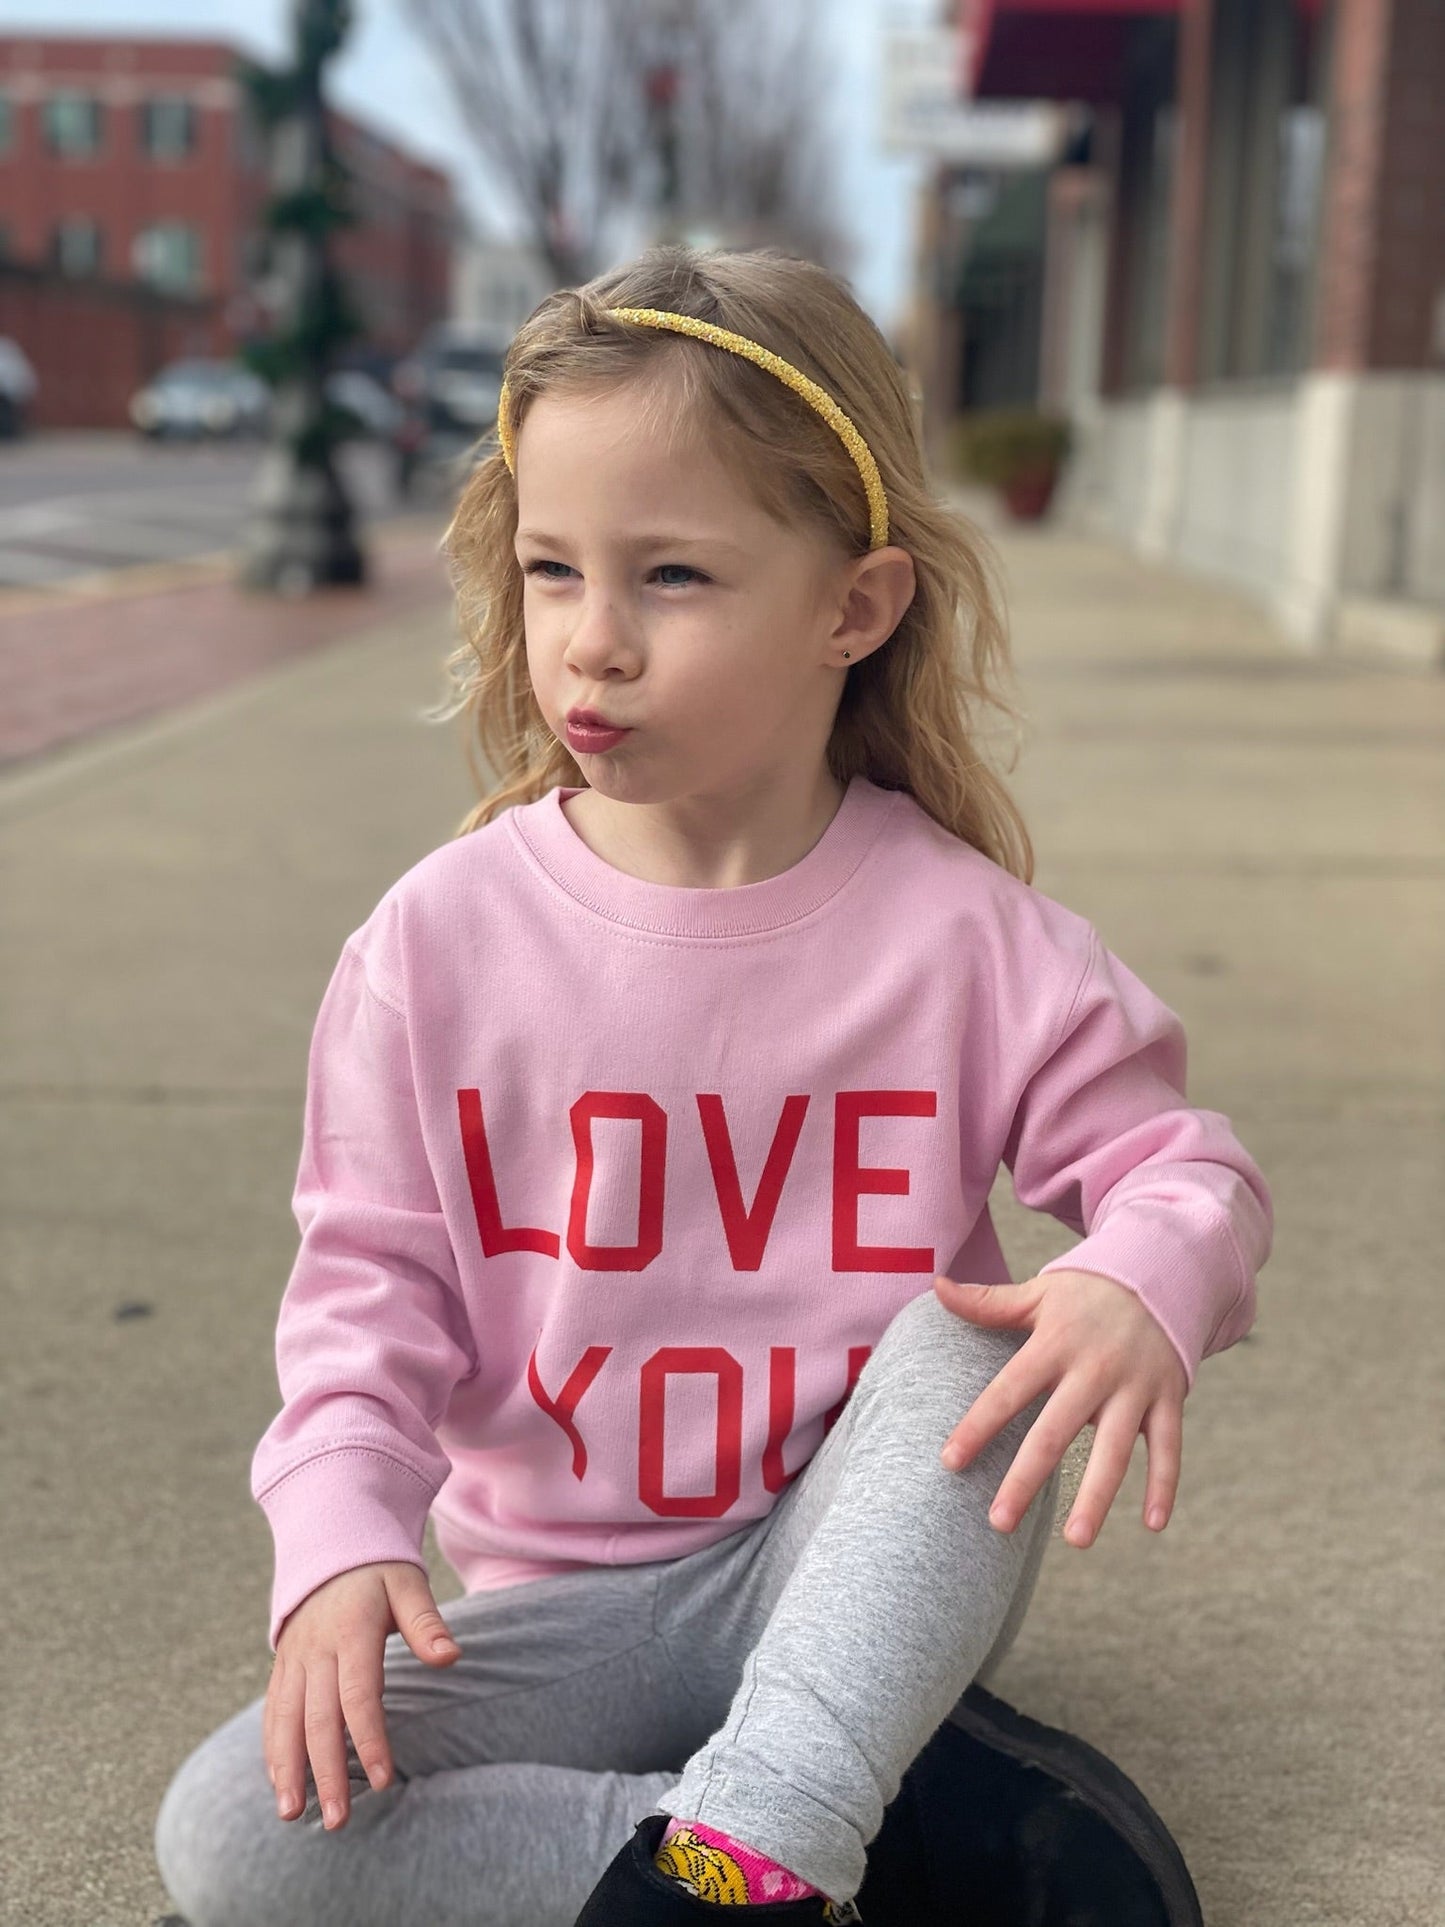 Love You | Toddler Sweatshirt | Red and Pink - Charlie Rae - Pink - Girls Tops- 170 - Charlie Rae